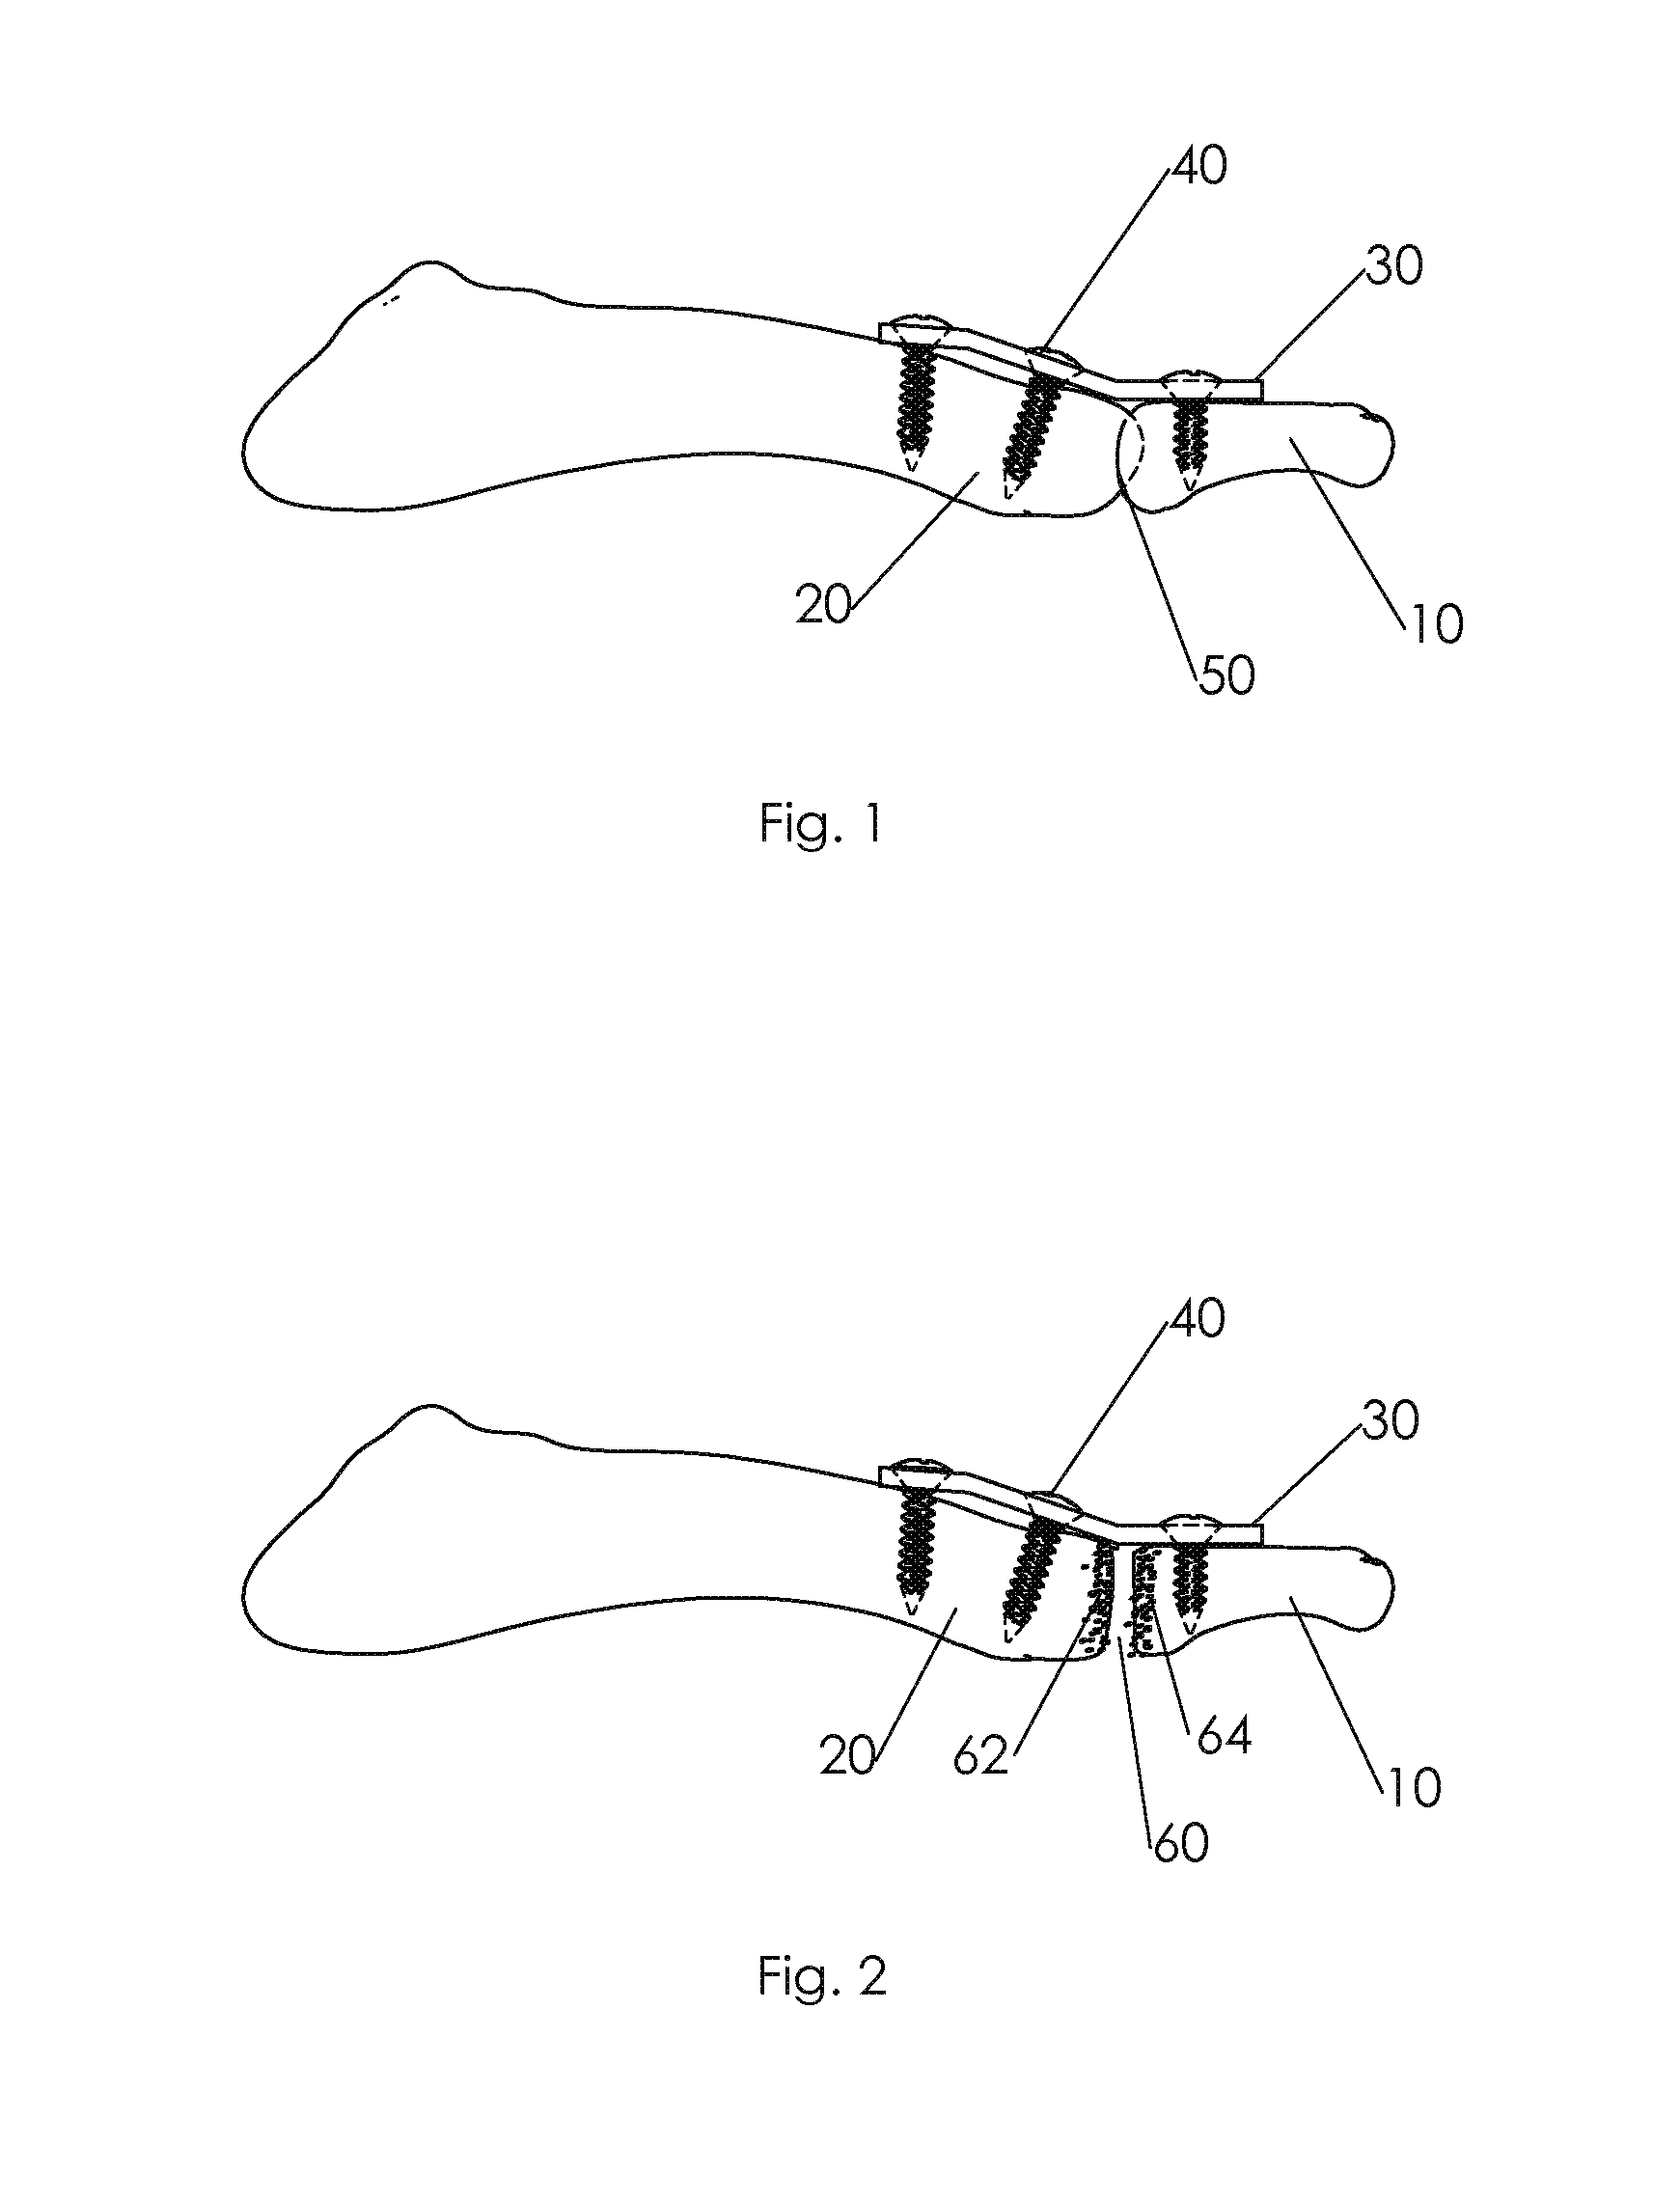 Shape changing bone implant and method of use for enhancing healing